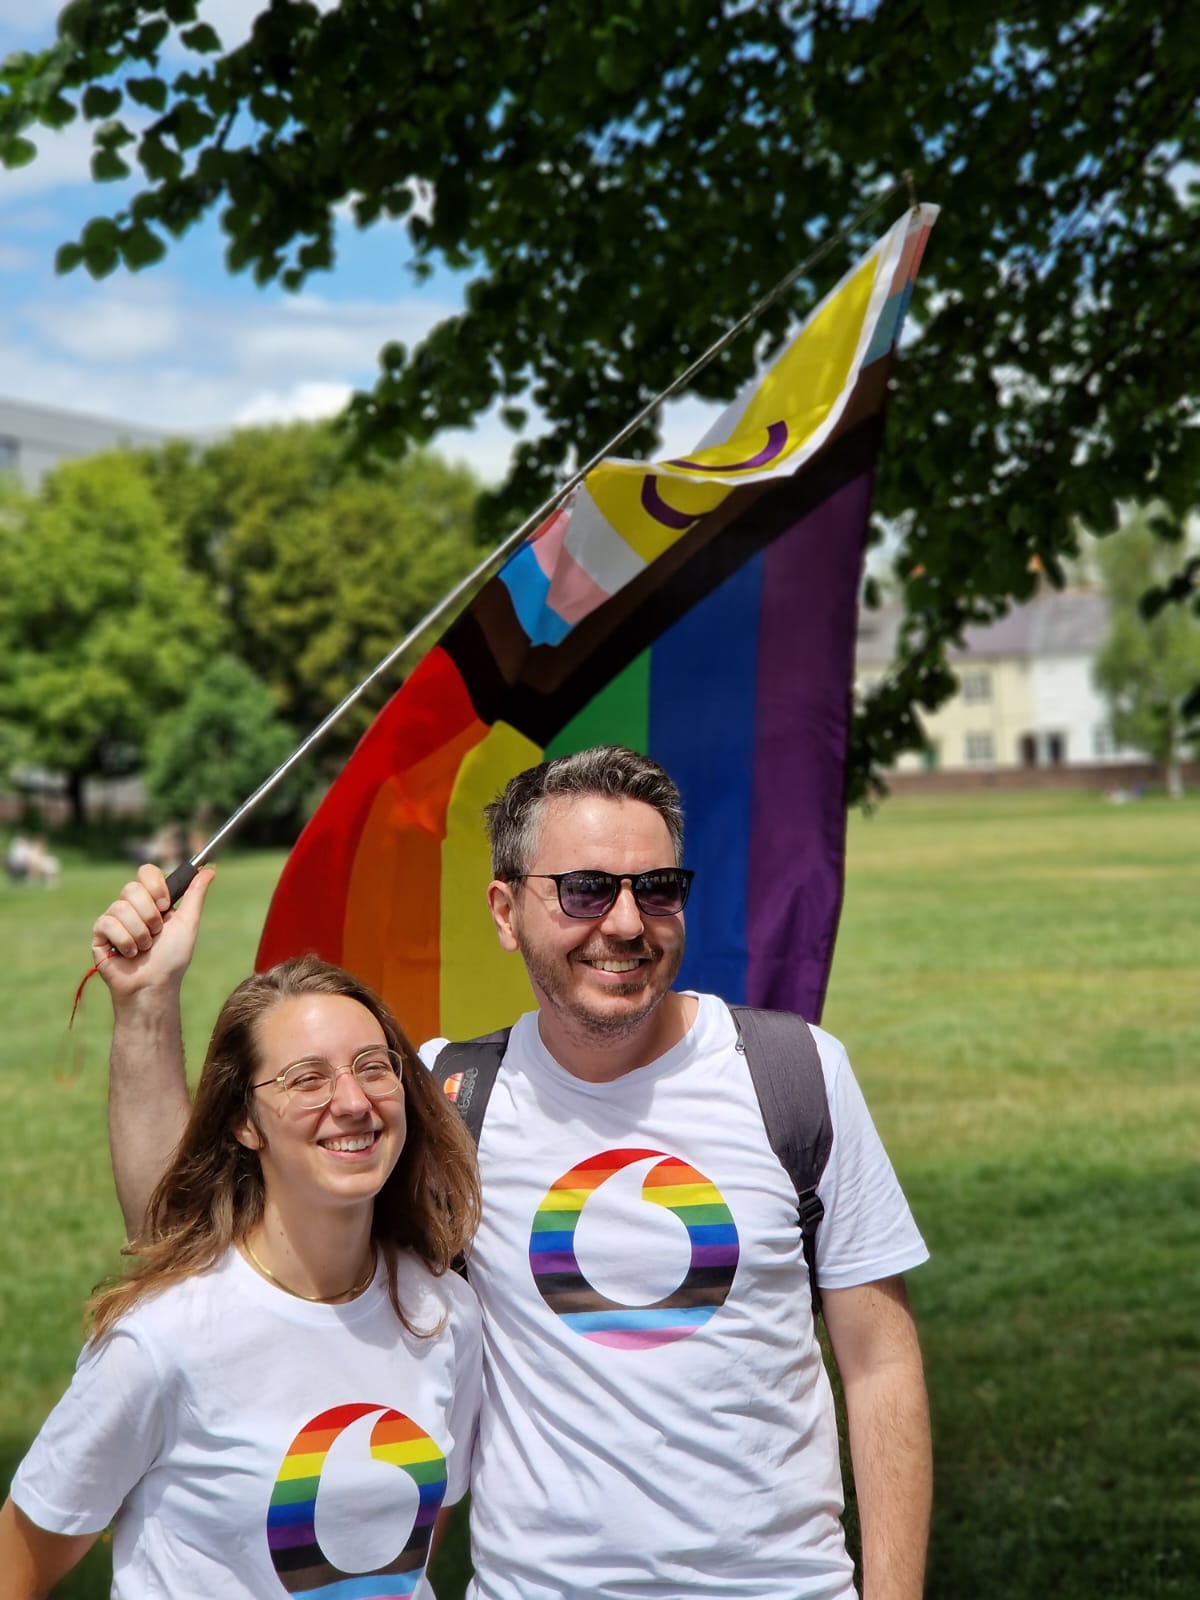 Marta and Mihai - our LGBT network leads at Newbury Pride with a pride flag